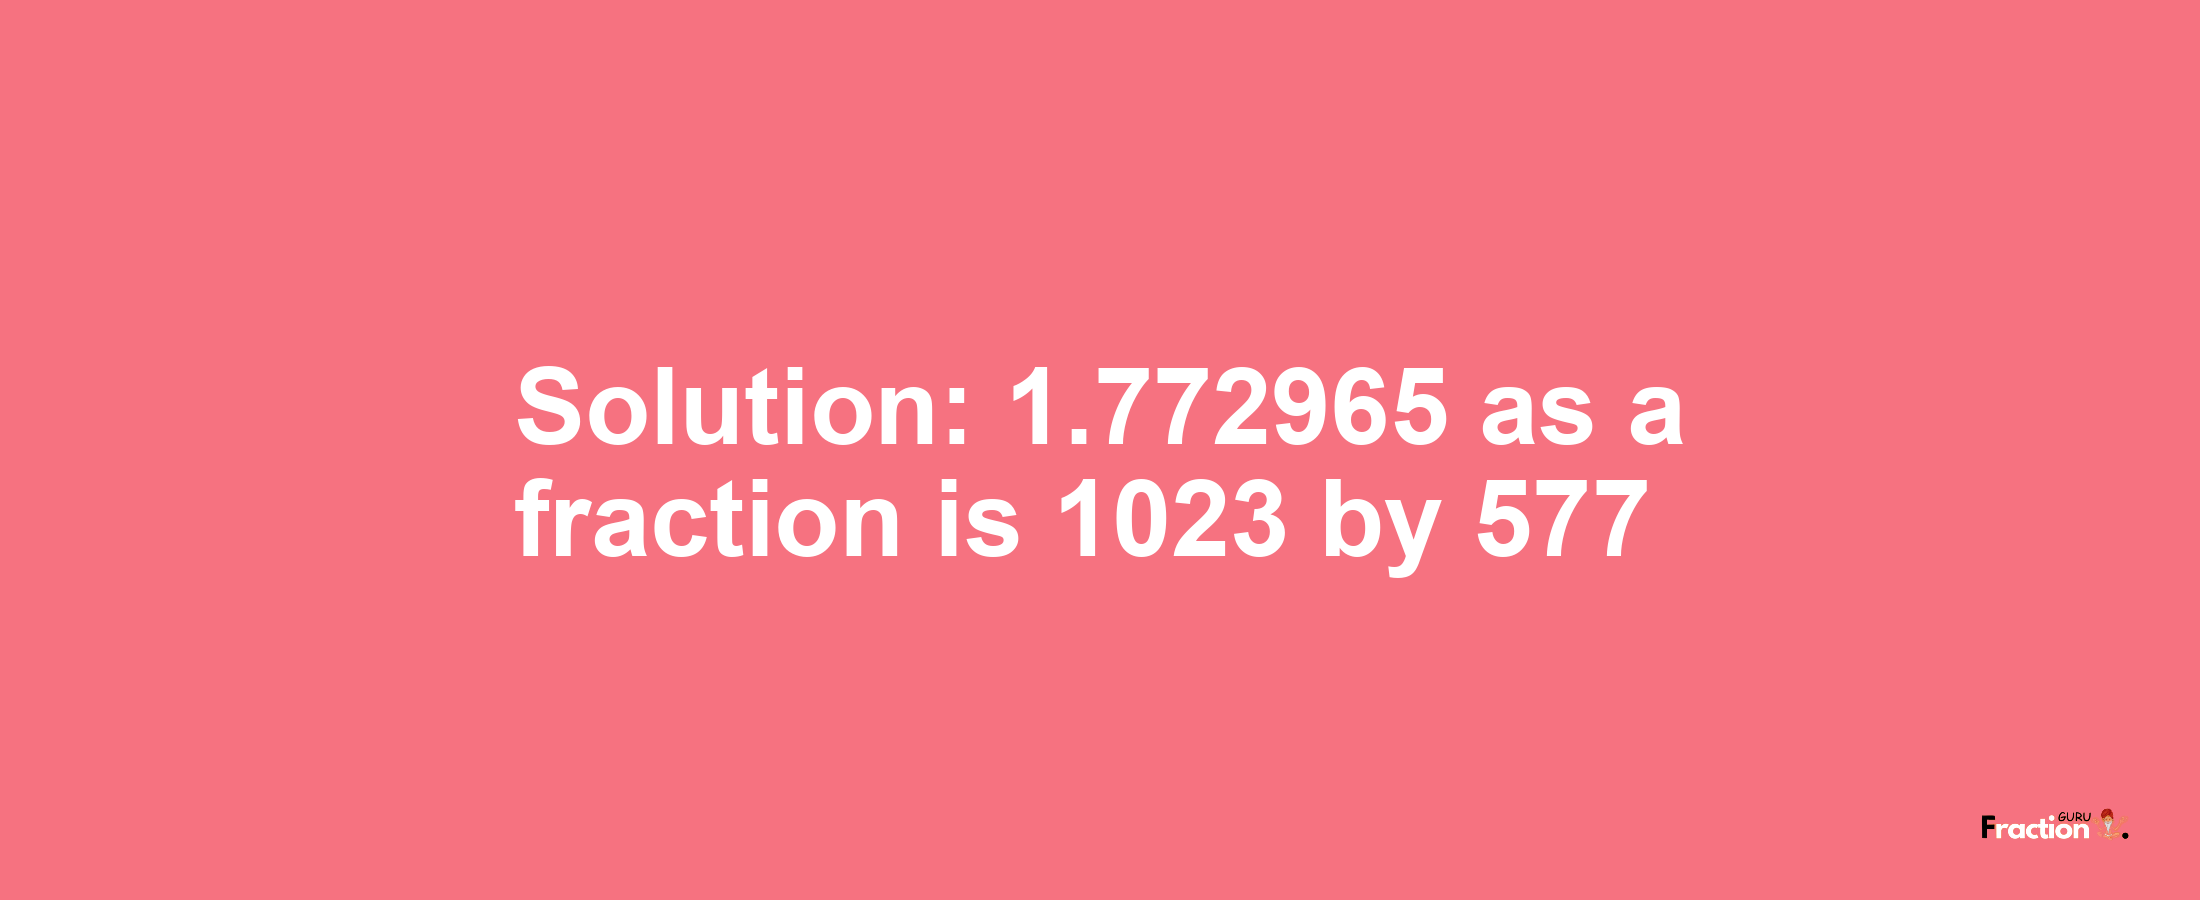 Solution:1.772965 as a fraction is 1023/577